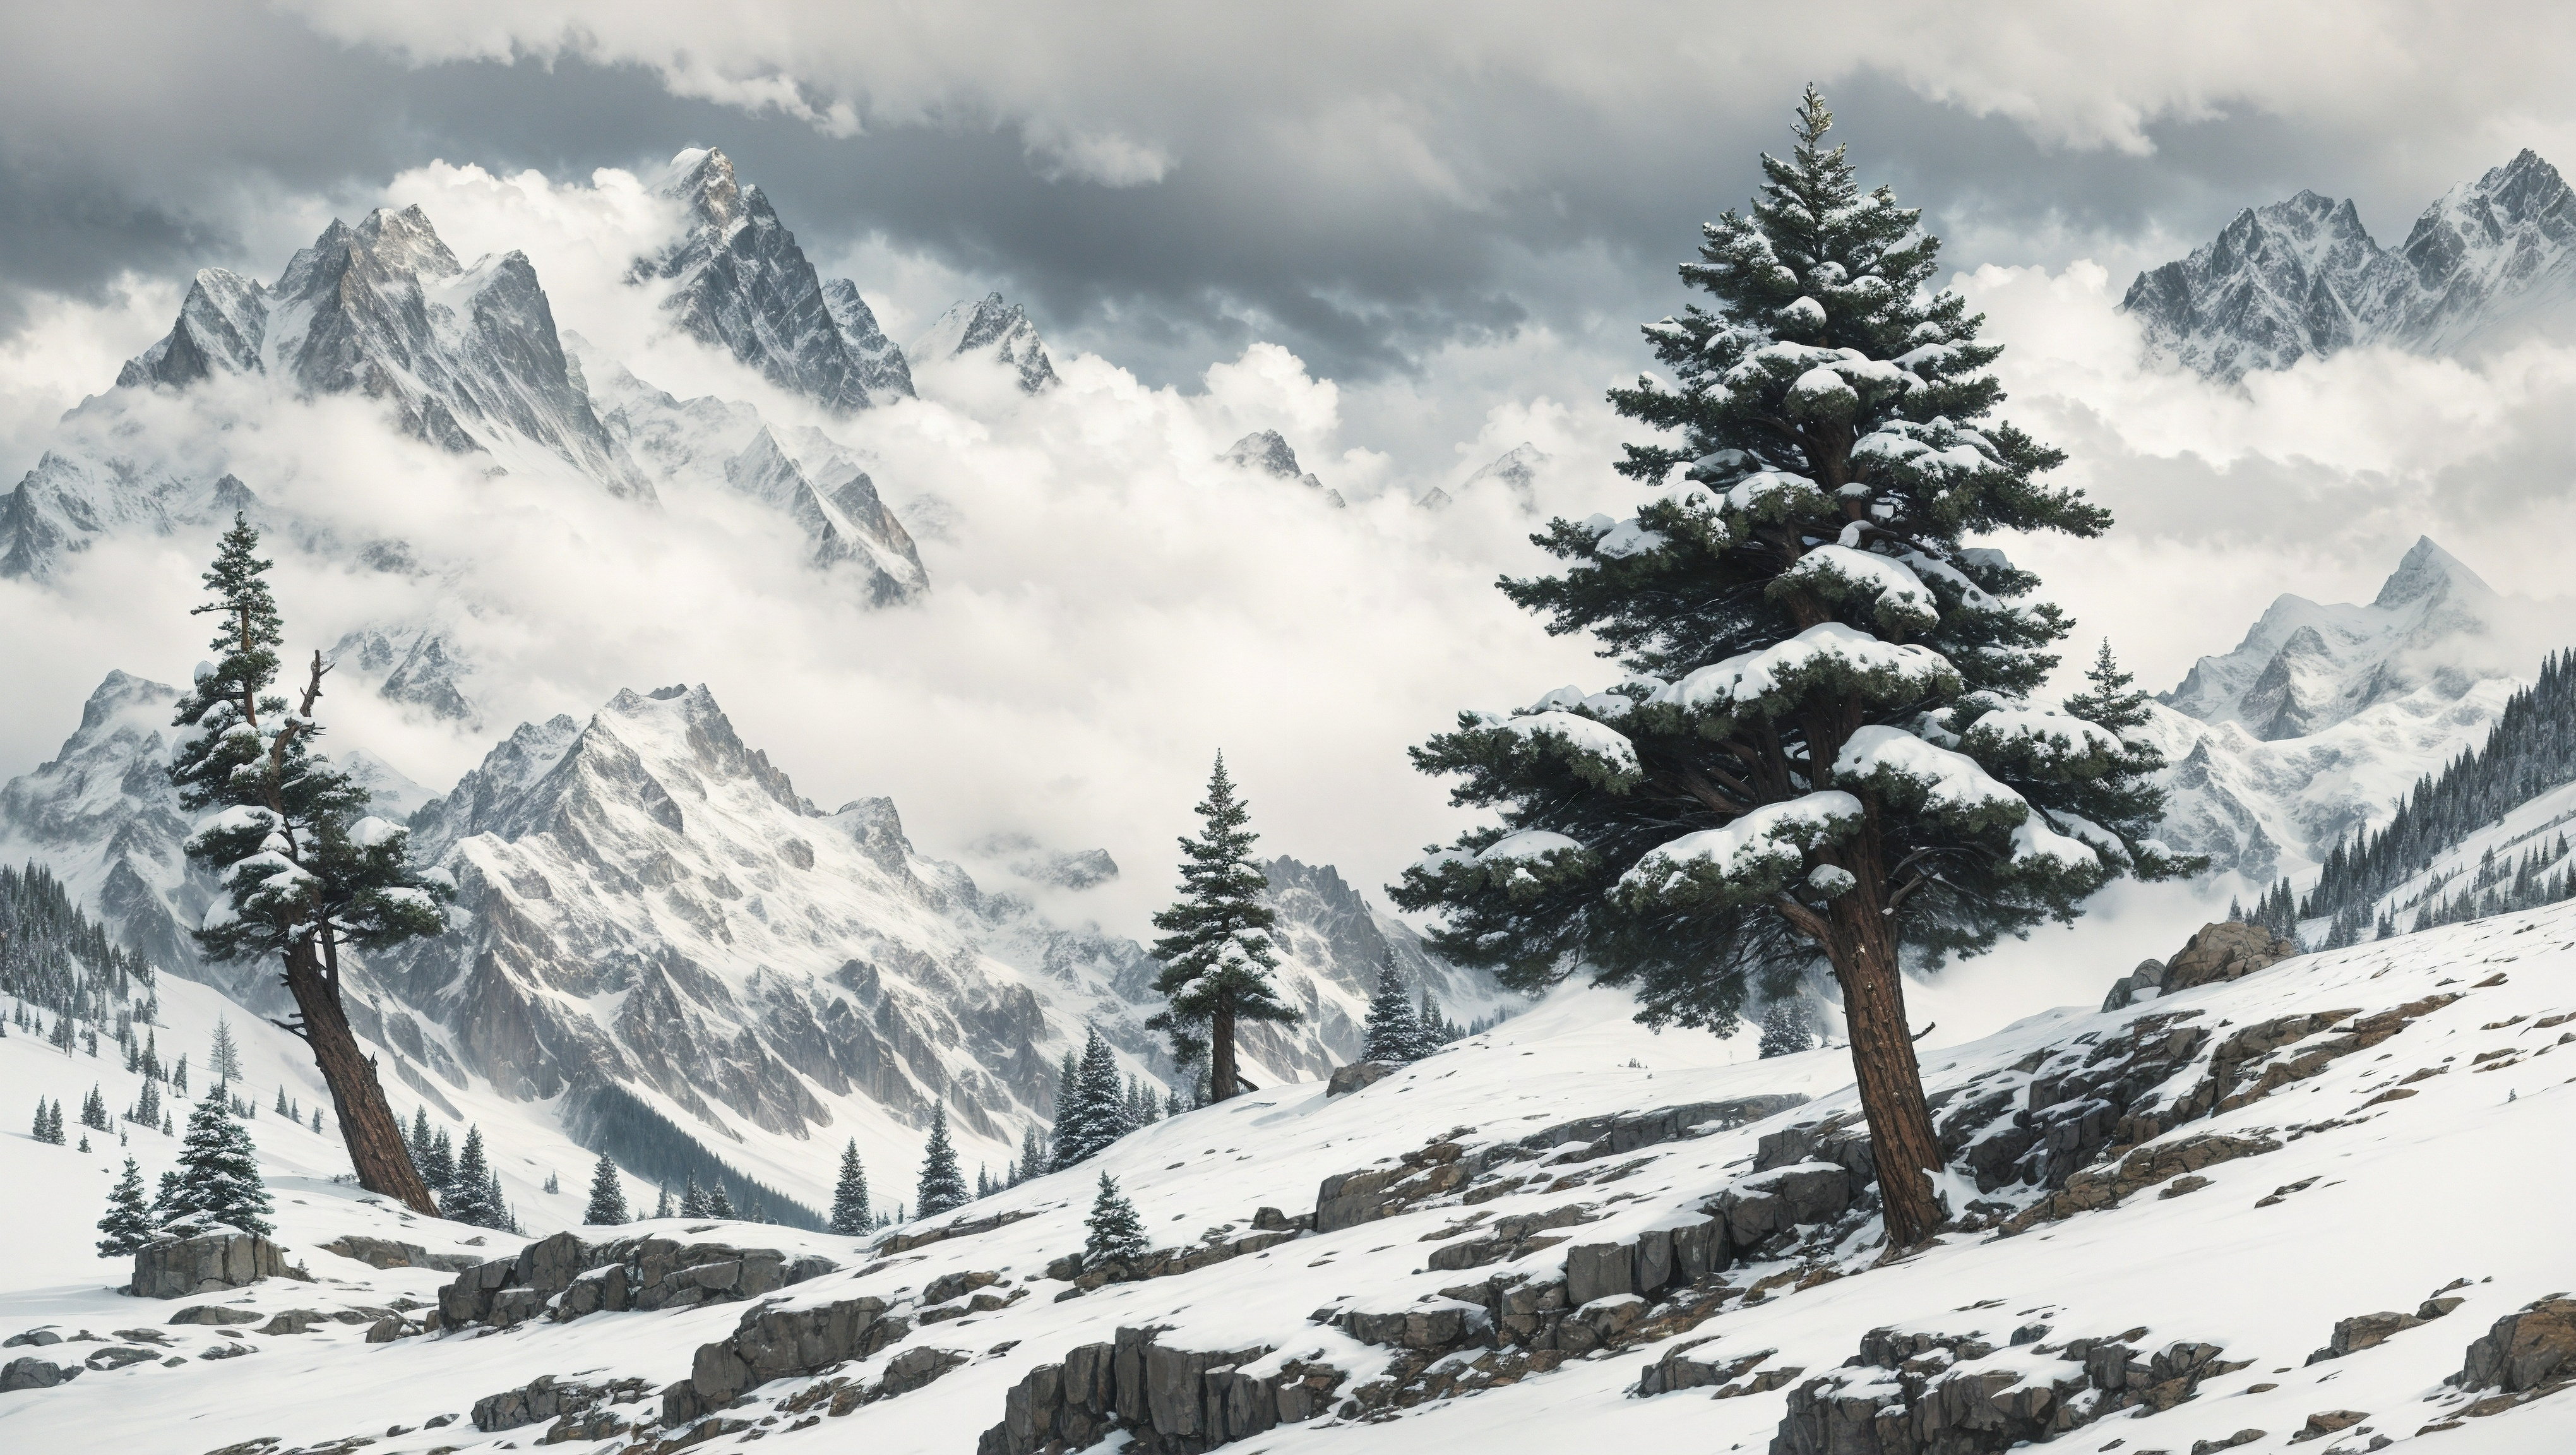 General 4080x2304 AI art digital art digital painting landscape mountains fir-tree trees snow storm nature snow covered outdoors mist sky clouds